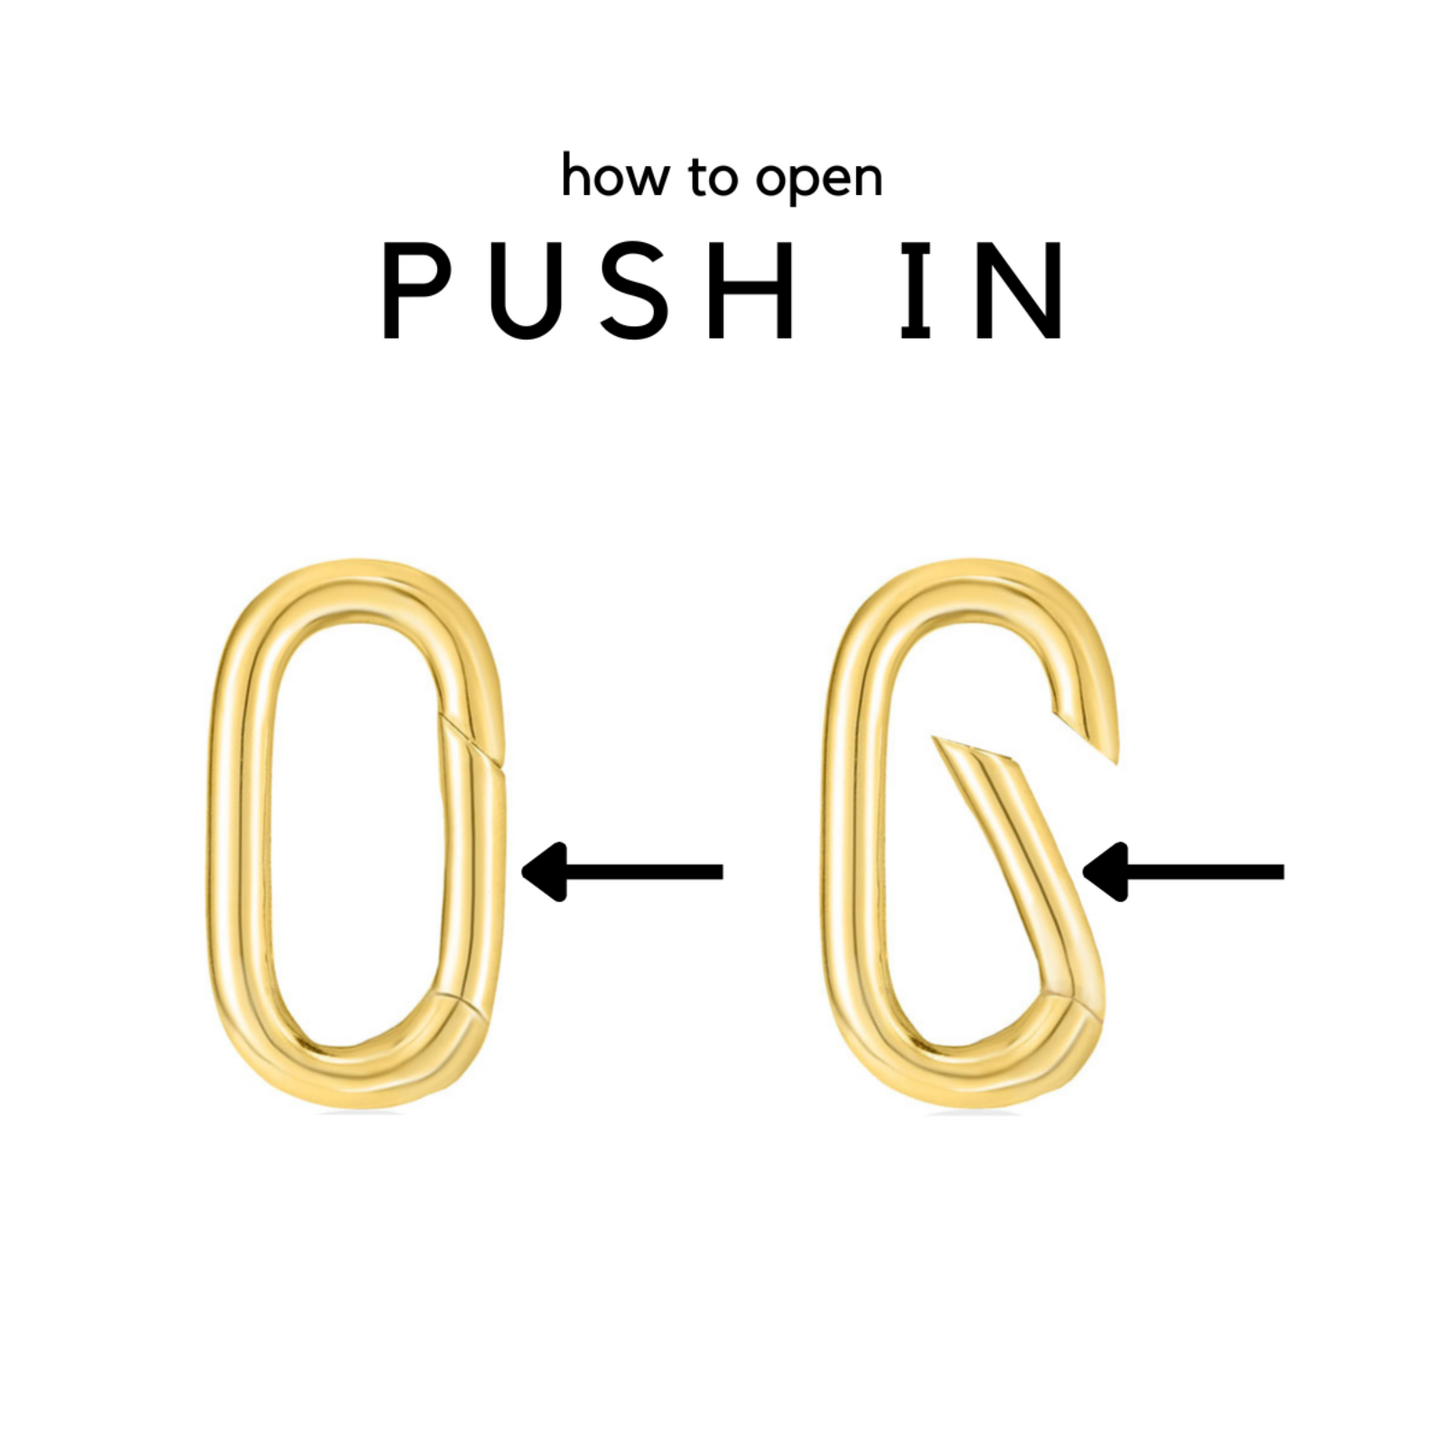 Push in charm opened and closed.